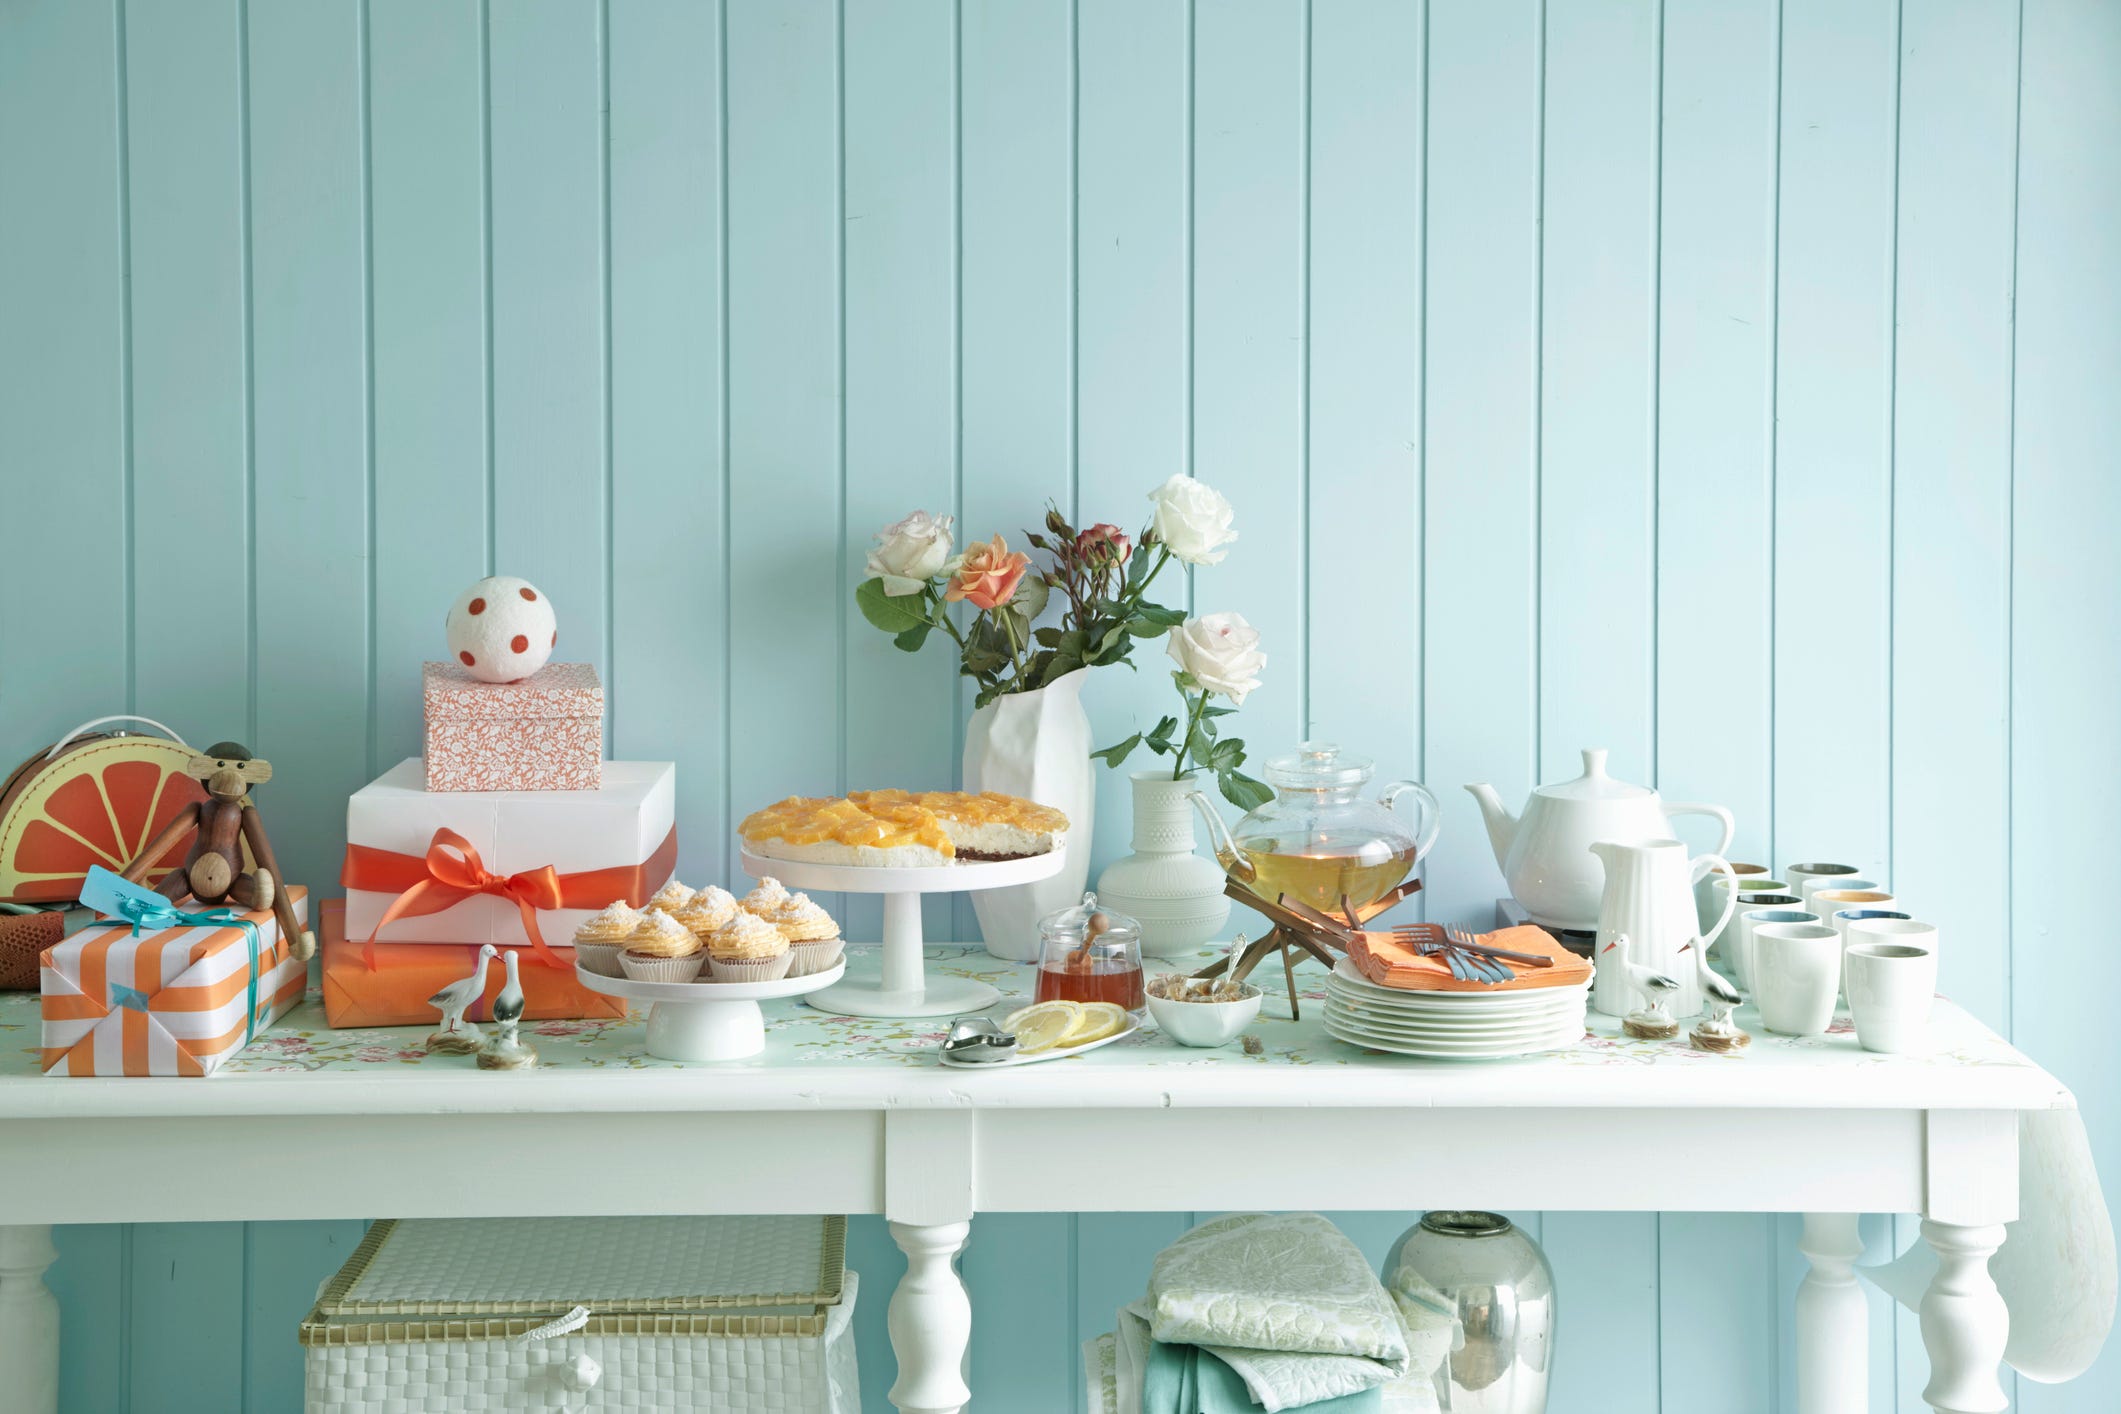 set of monthly trendy baby shower ideas